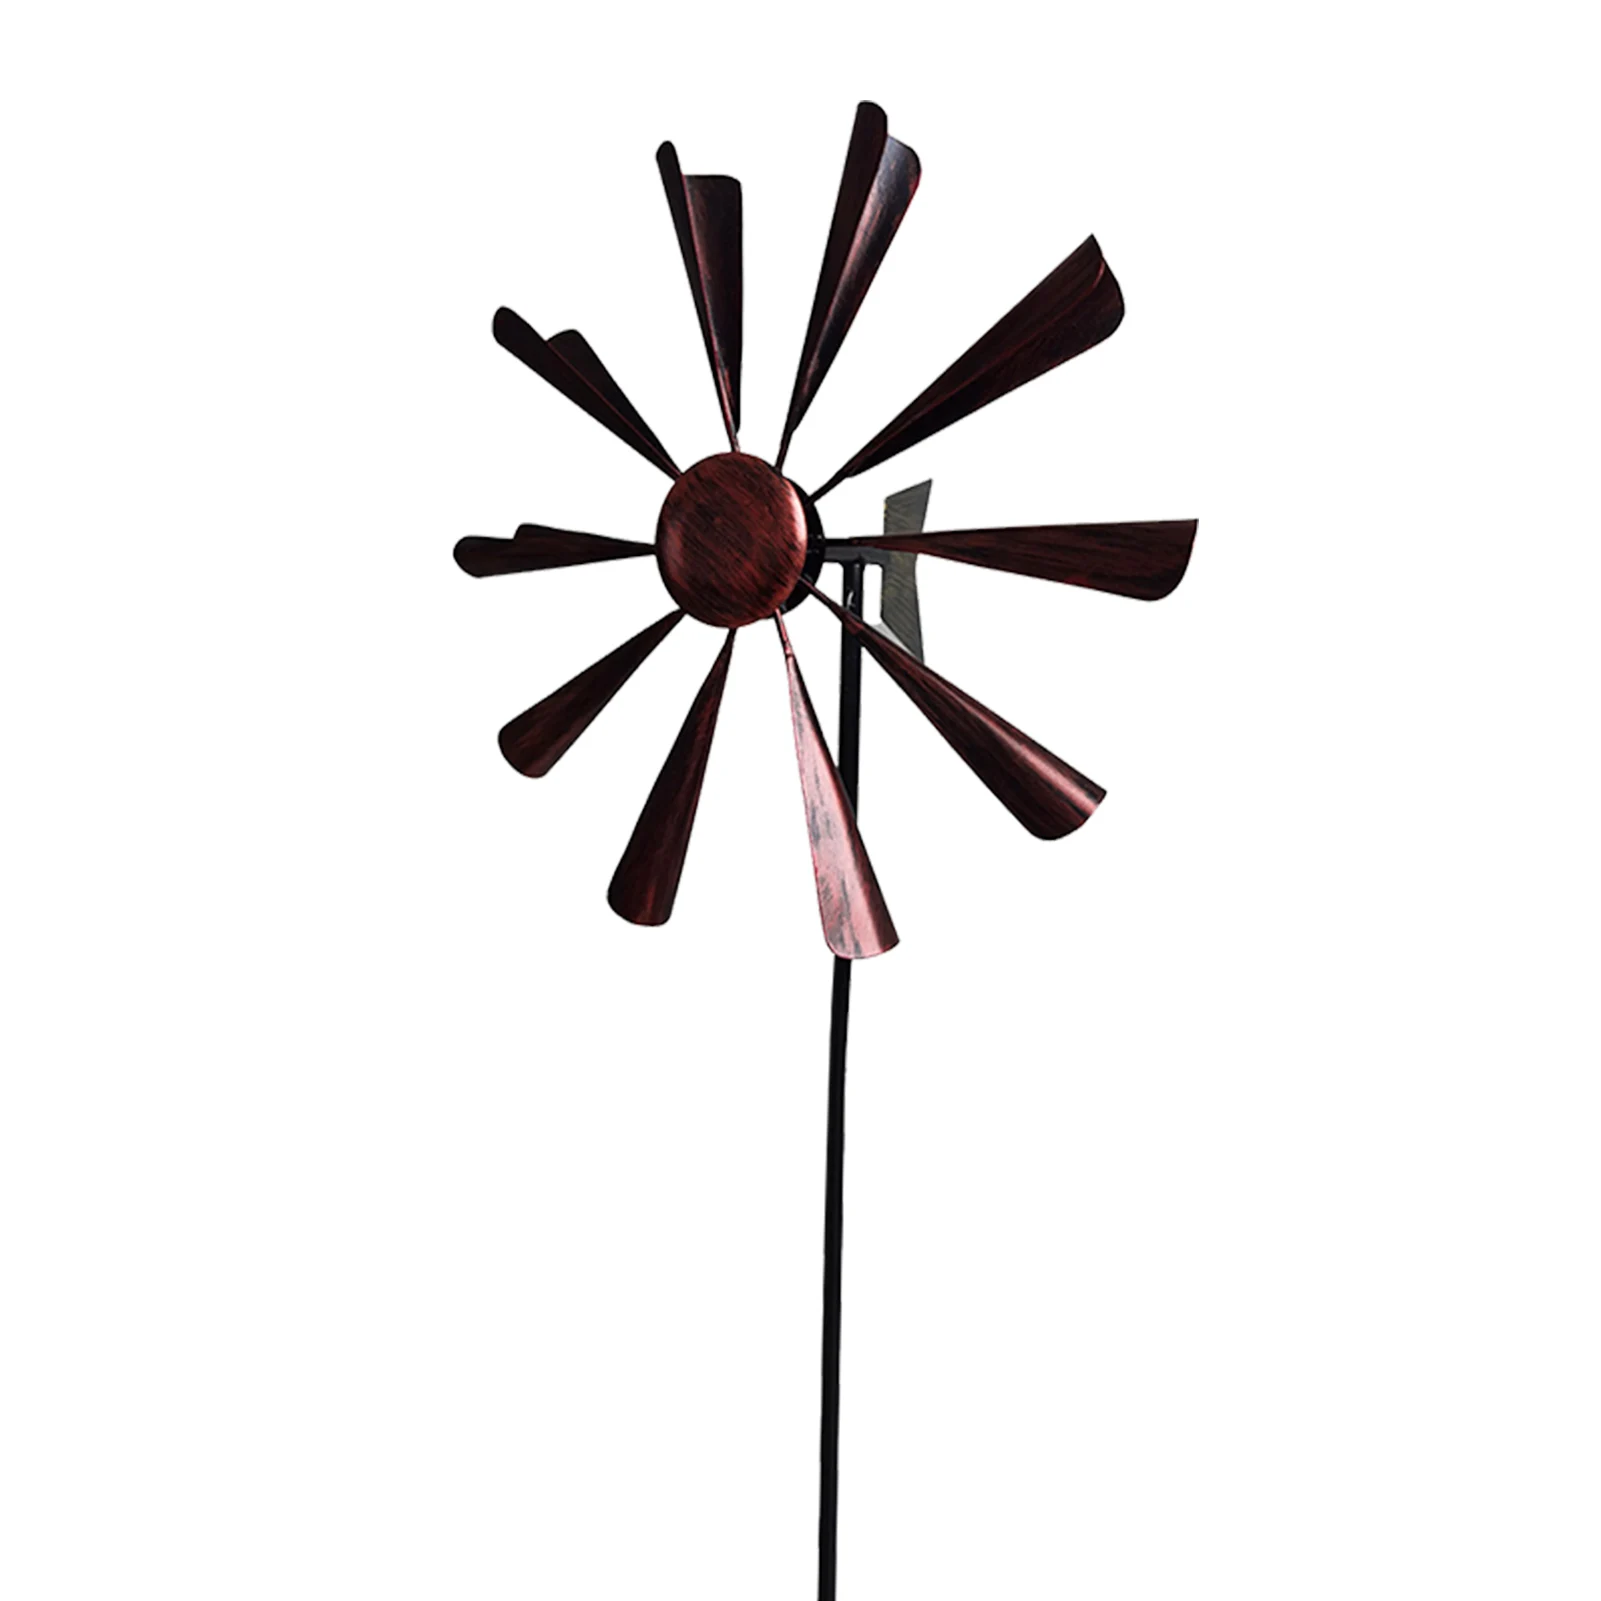 

Easy Install Outdoor Decor Gift DIY Tool Ornament Garden Windmill Lawn Whirligig With Stake Patio Backyard Metal Wind Spinner